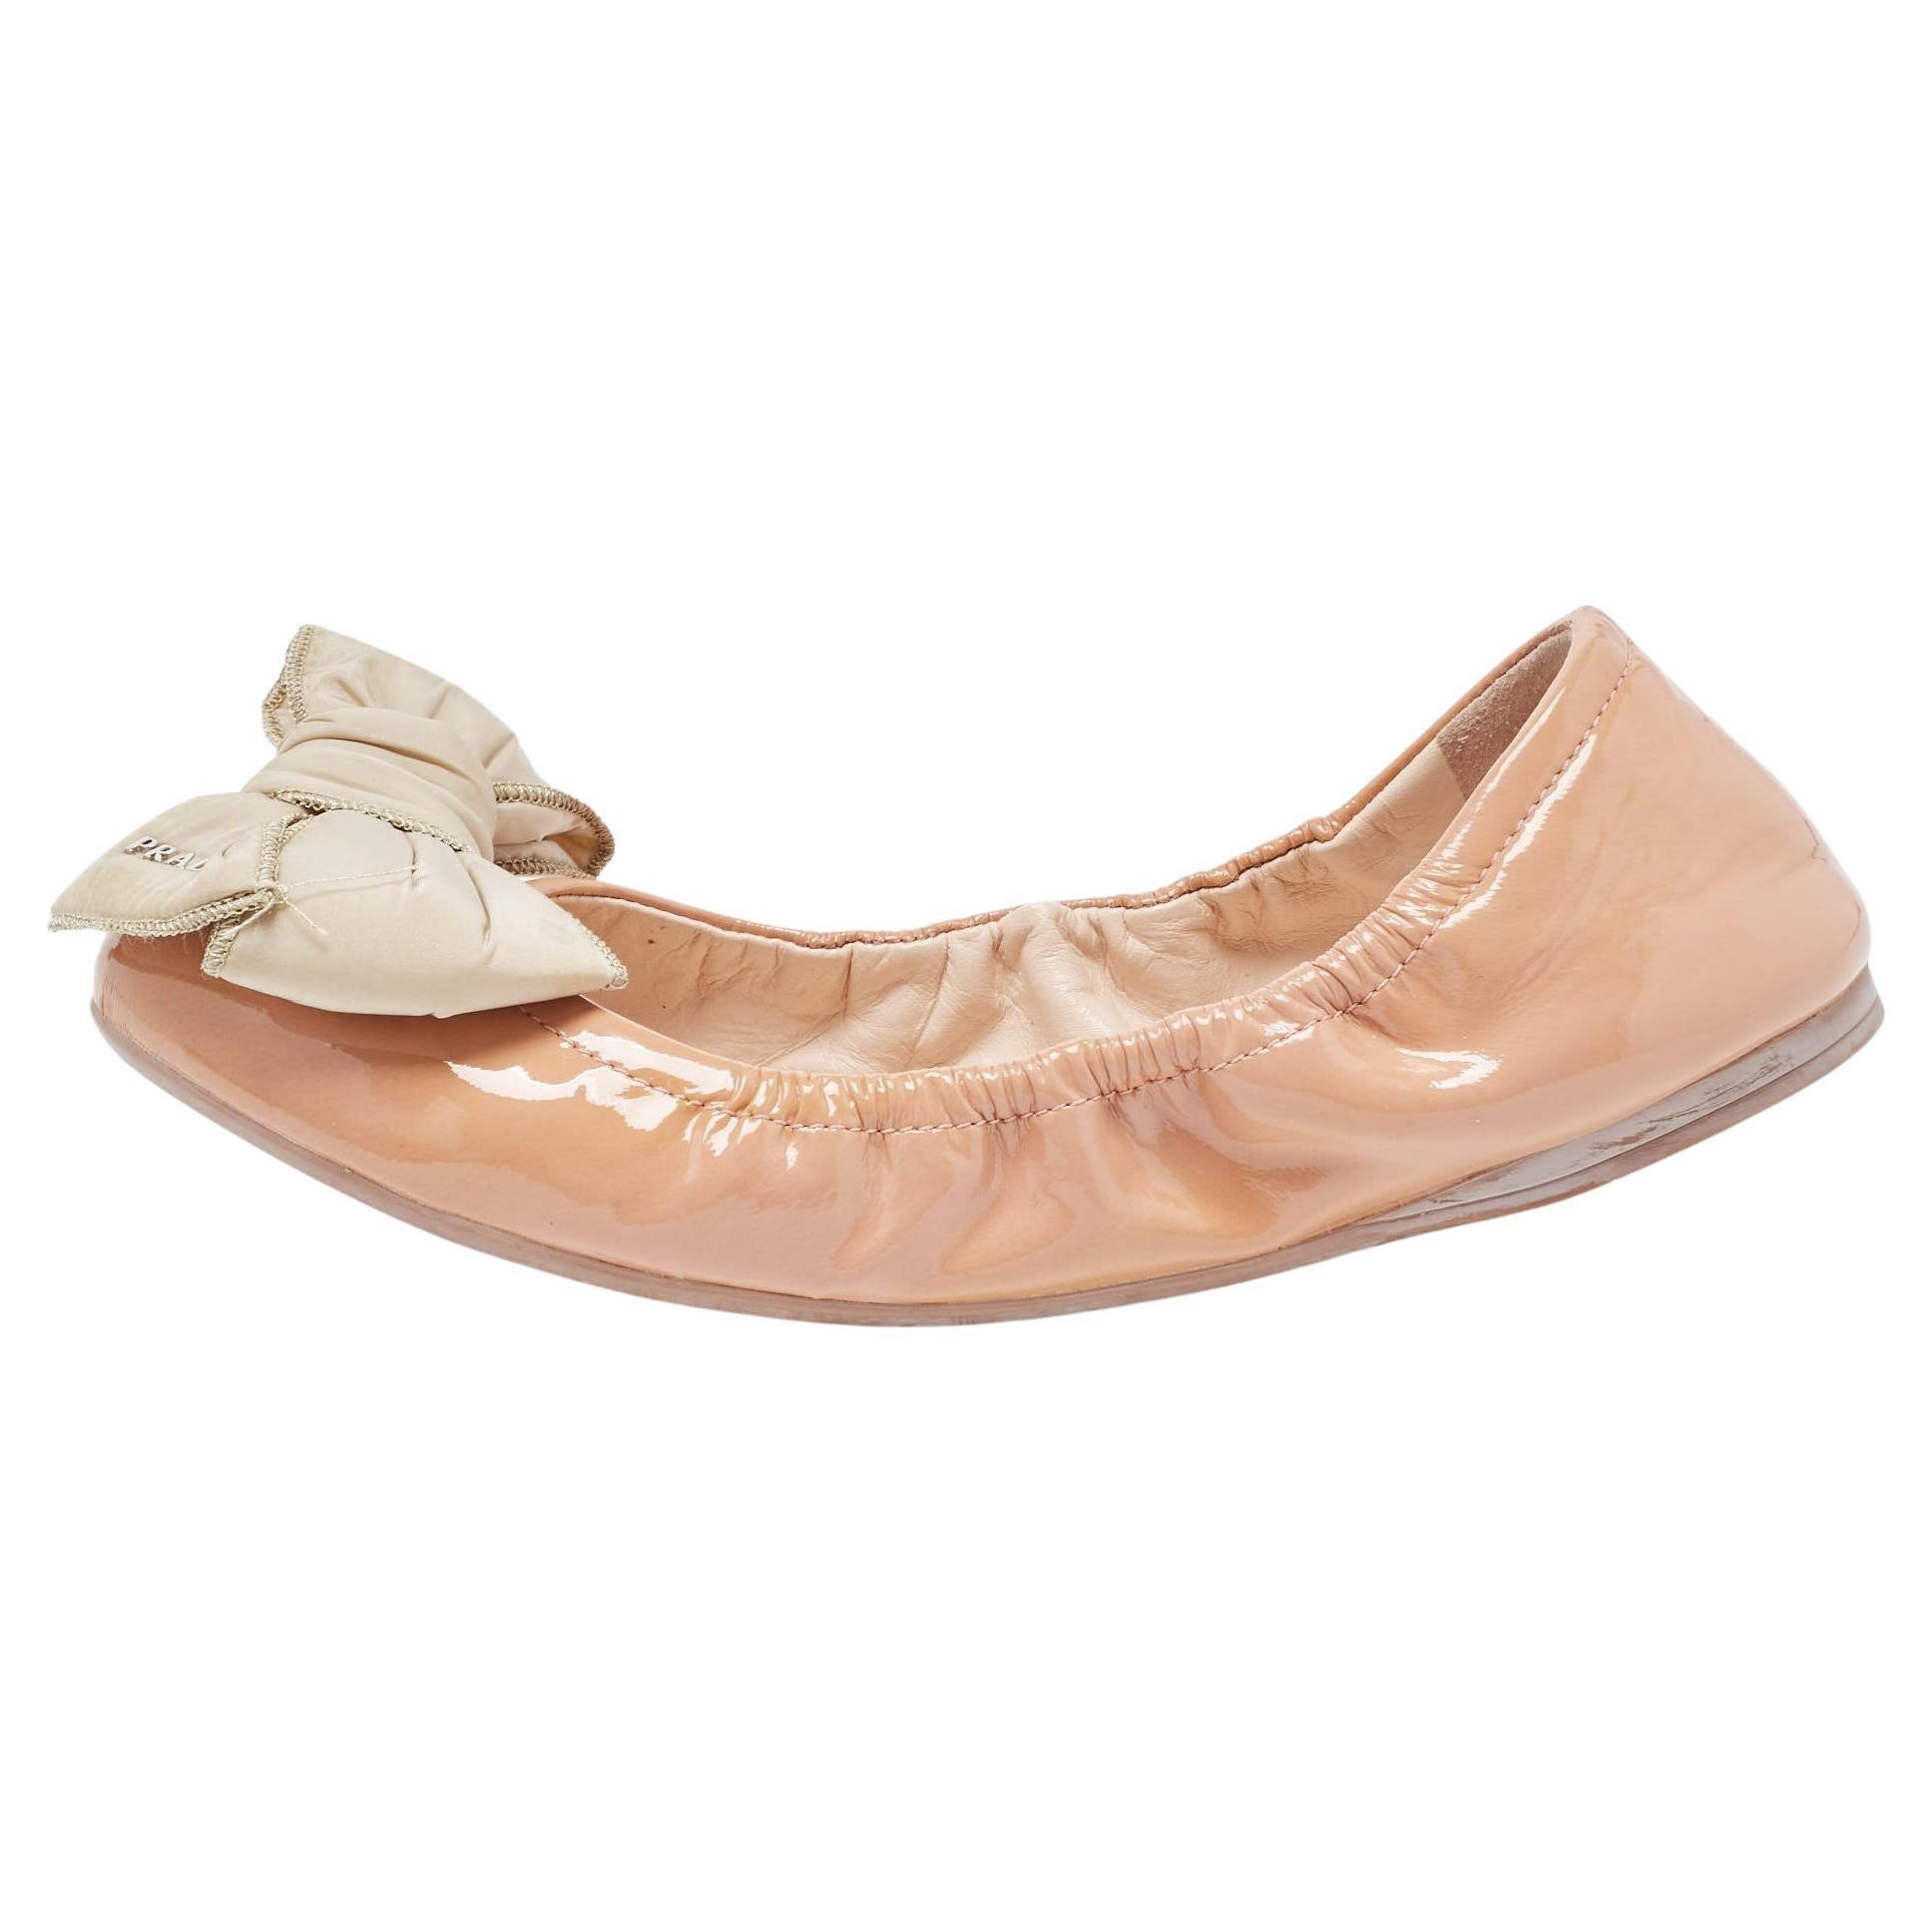 Prada Beige Patent Leather Bow Scrunch Ballet Flats Size 36.5 For Sale